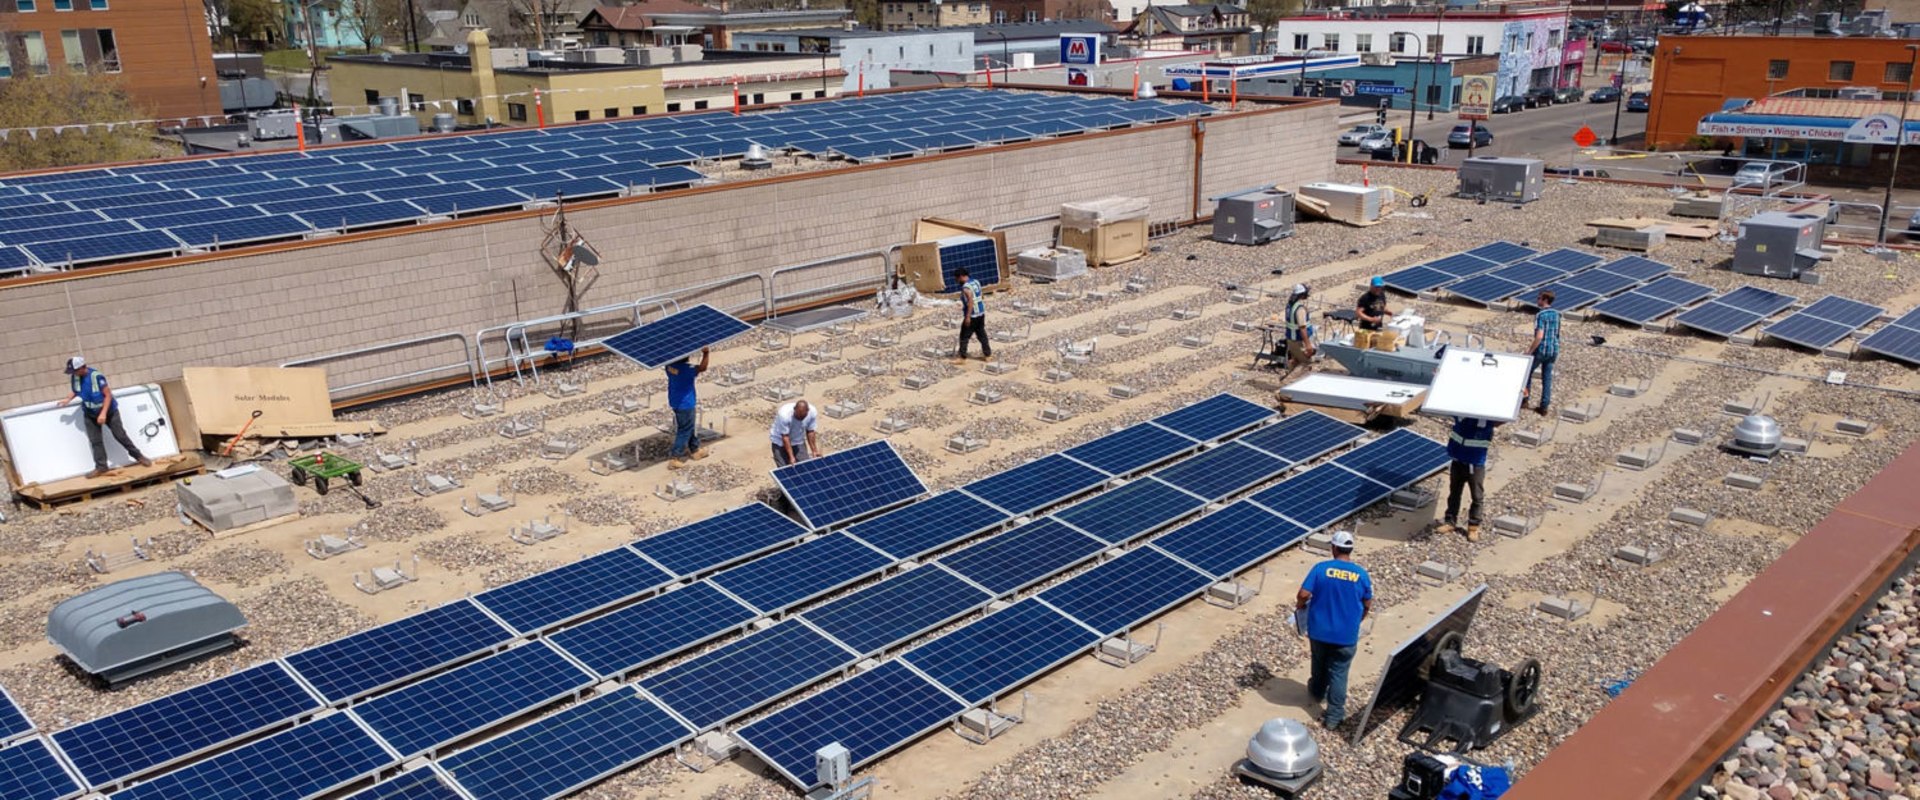 Community Solar Projects: Bringing Renewable Energy to the Masses